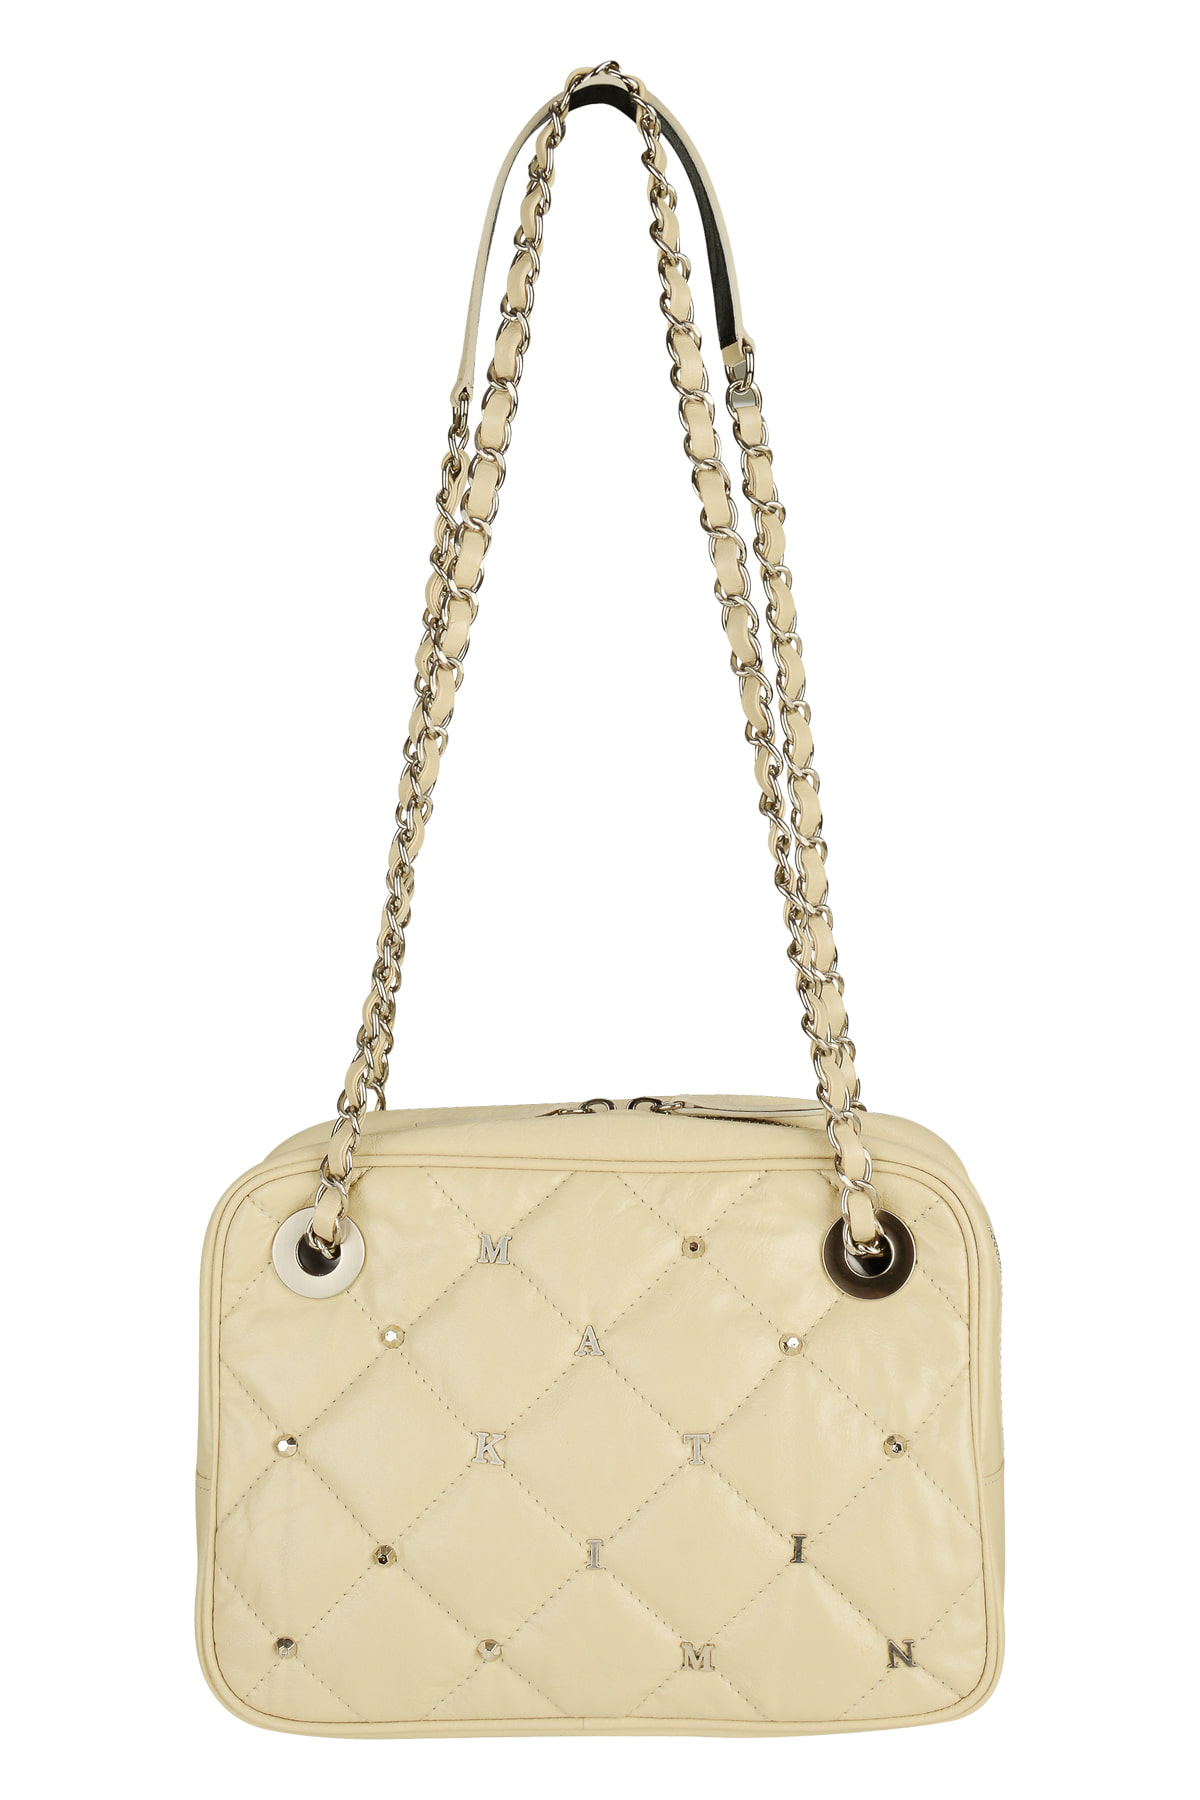 STUD MIDDLE QUILTING BAG IN IVORY